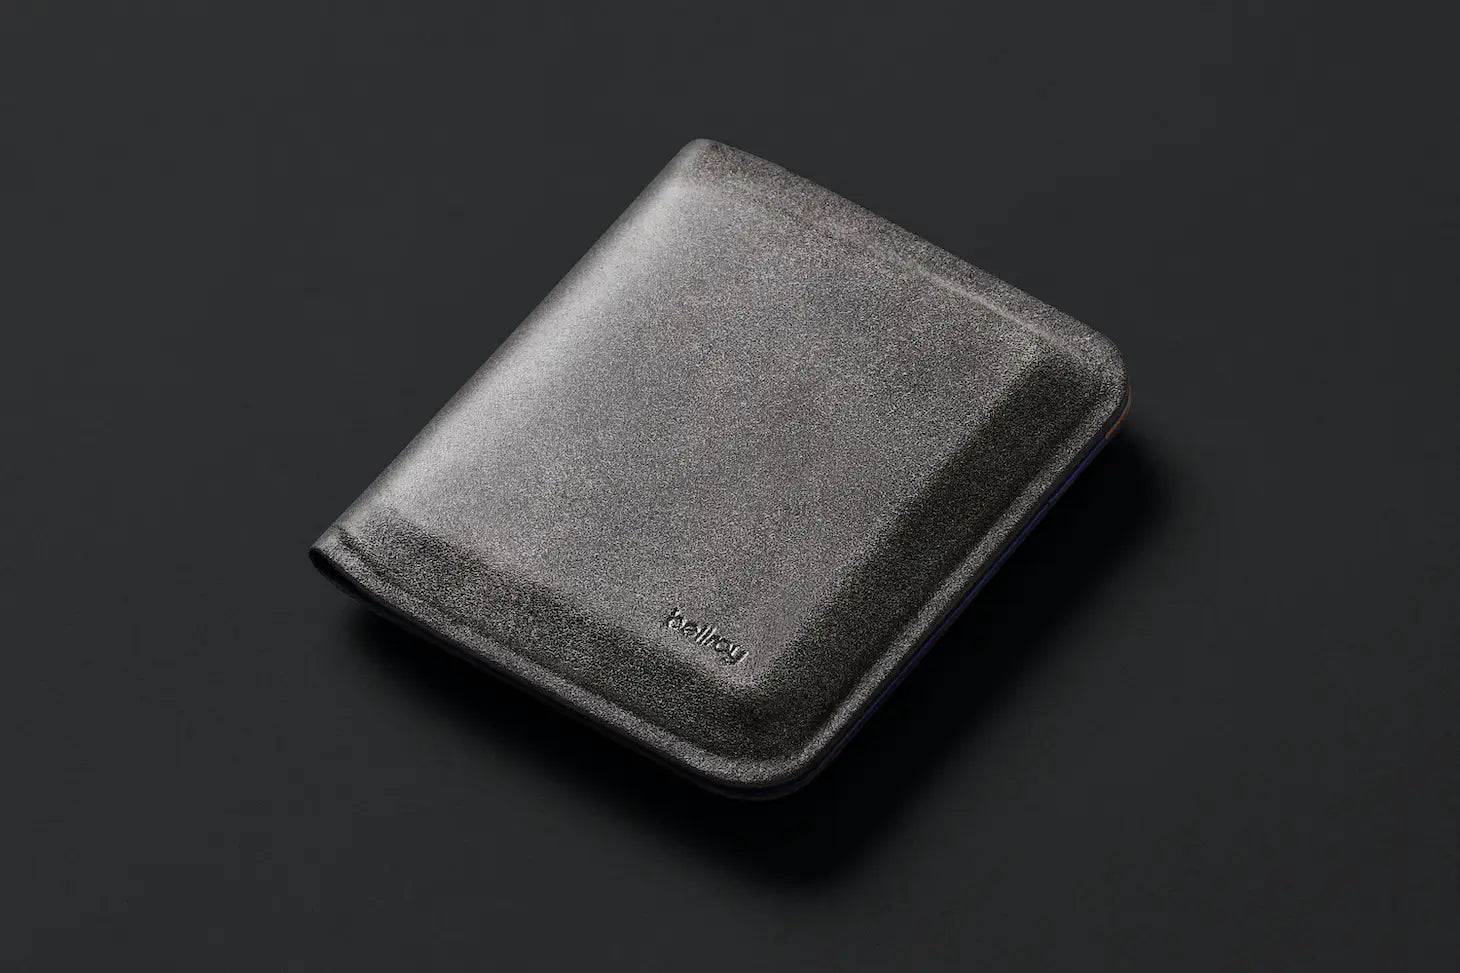 Bellroy - Apex Note Sleeve-Men's Accessories-PepperBlue-Yaletown-Vancouver-Surrey-Canada